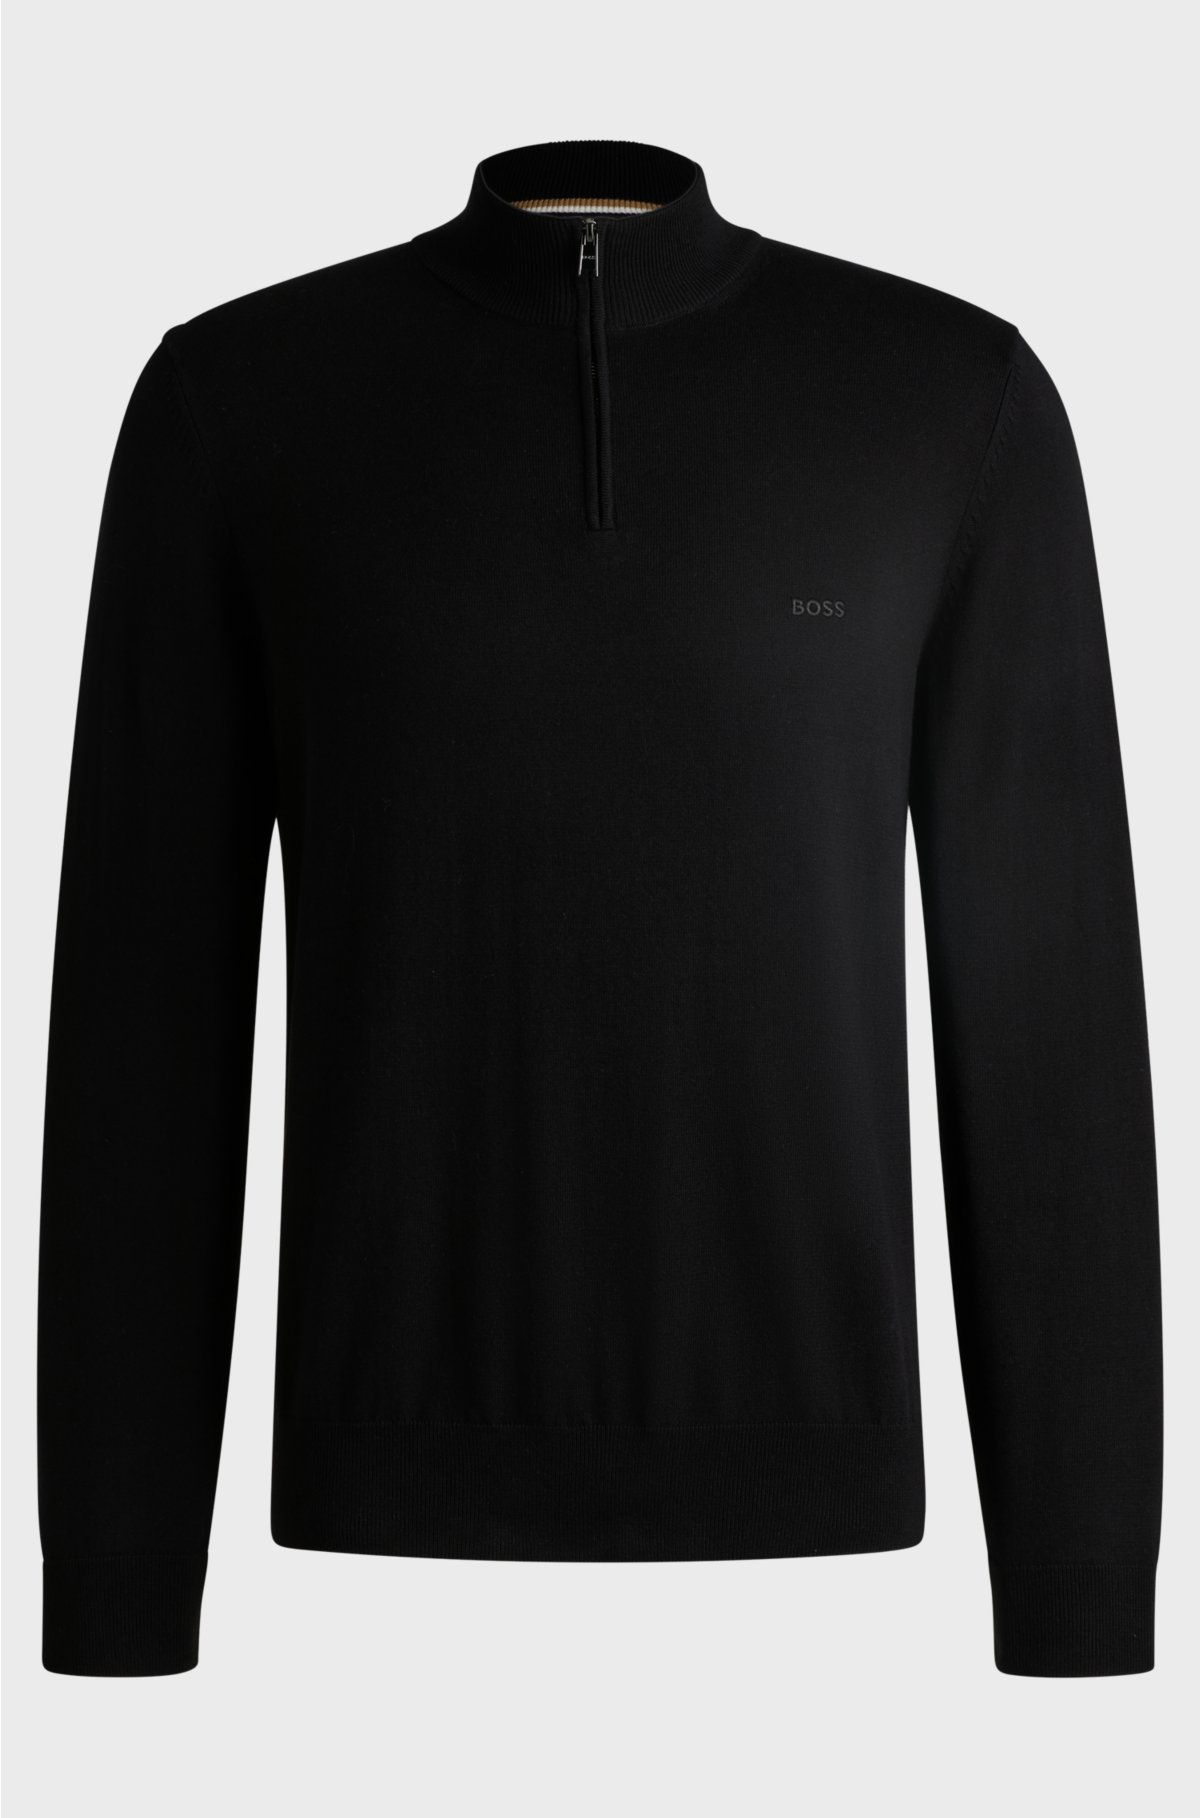 Logo-embroidered zip-neck sweater in cotton jersey, Black